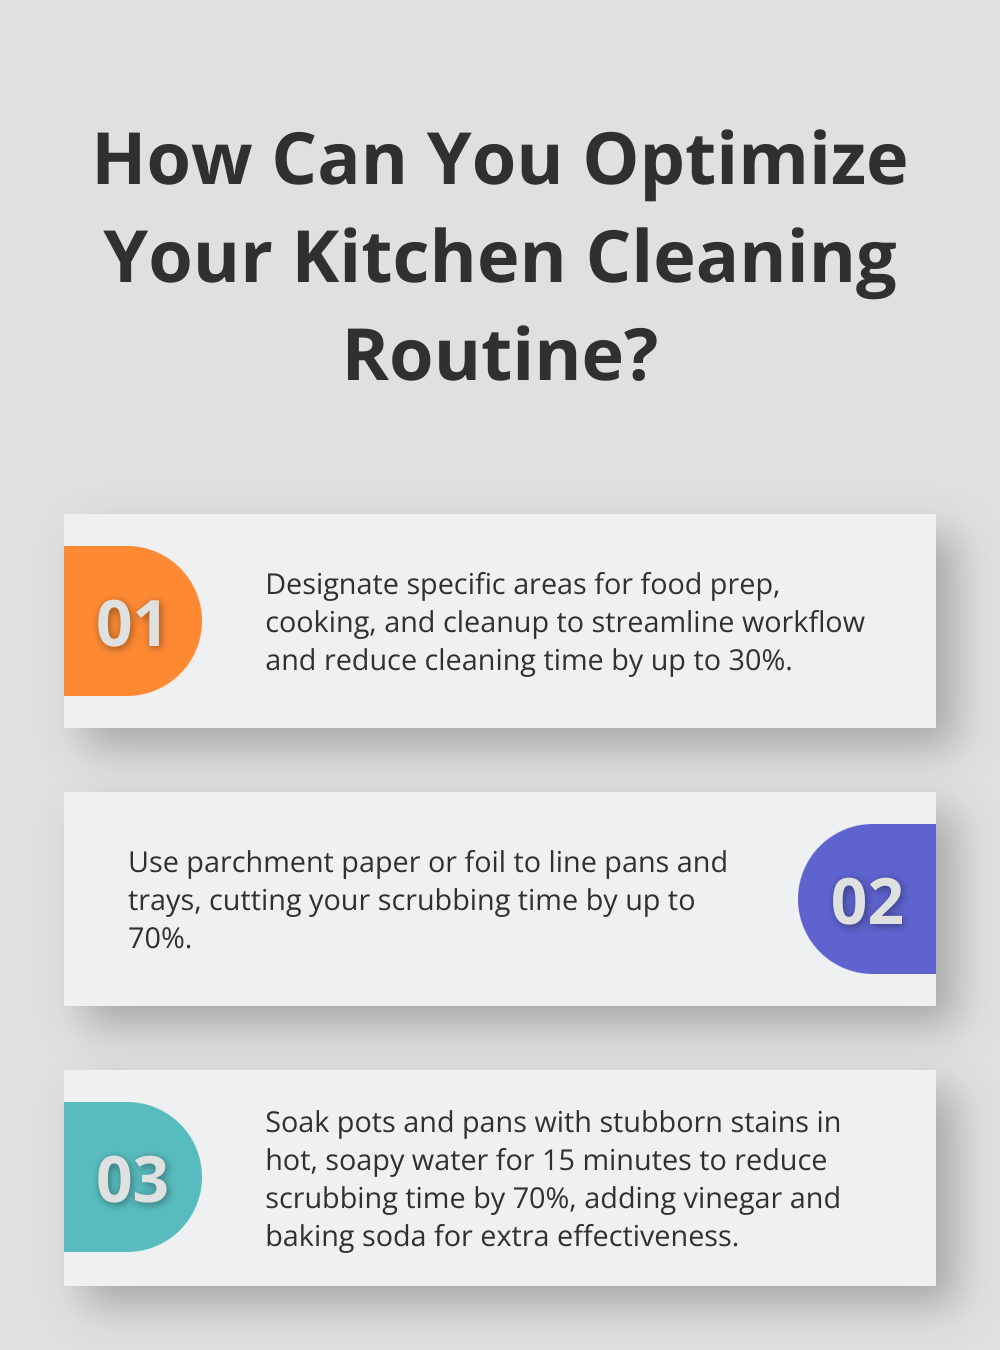 Fact - How Can You Optimize Your Kitchen Cleaning Routine?